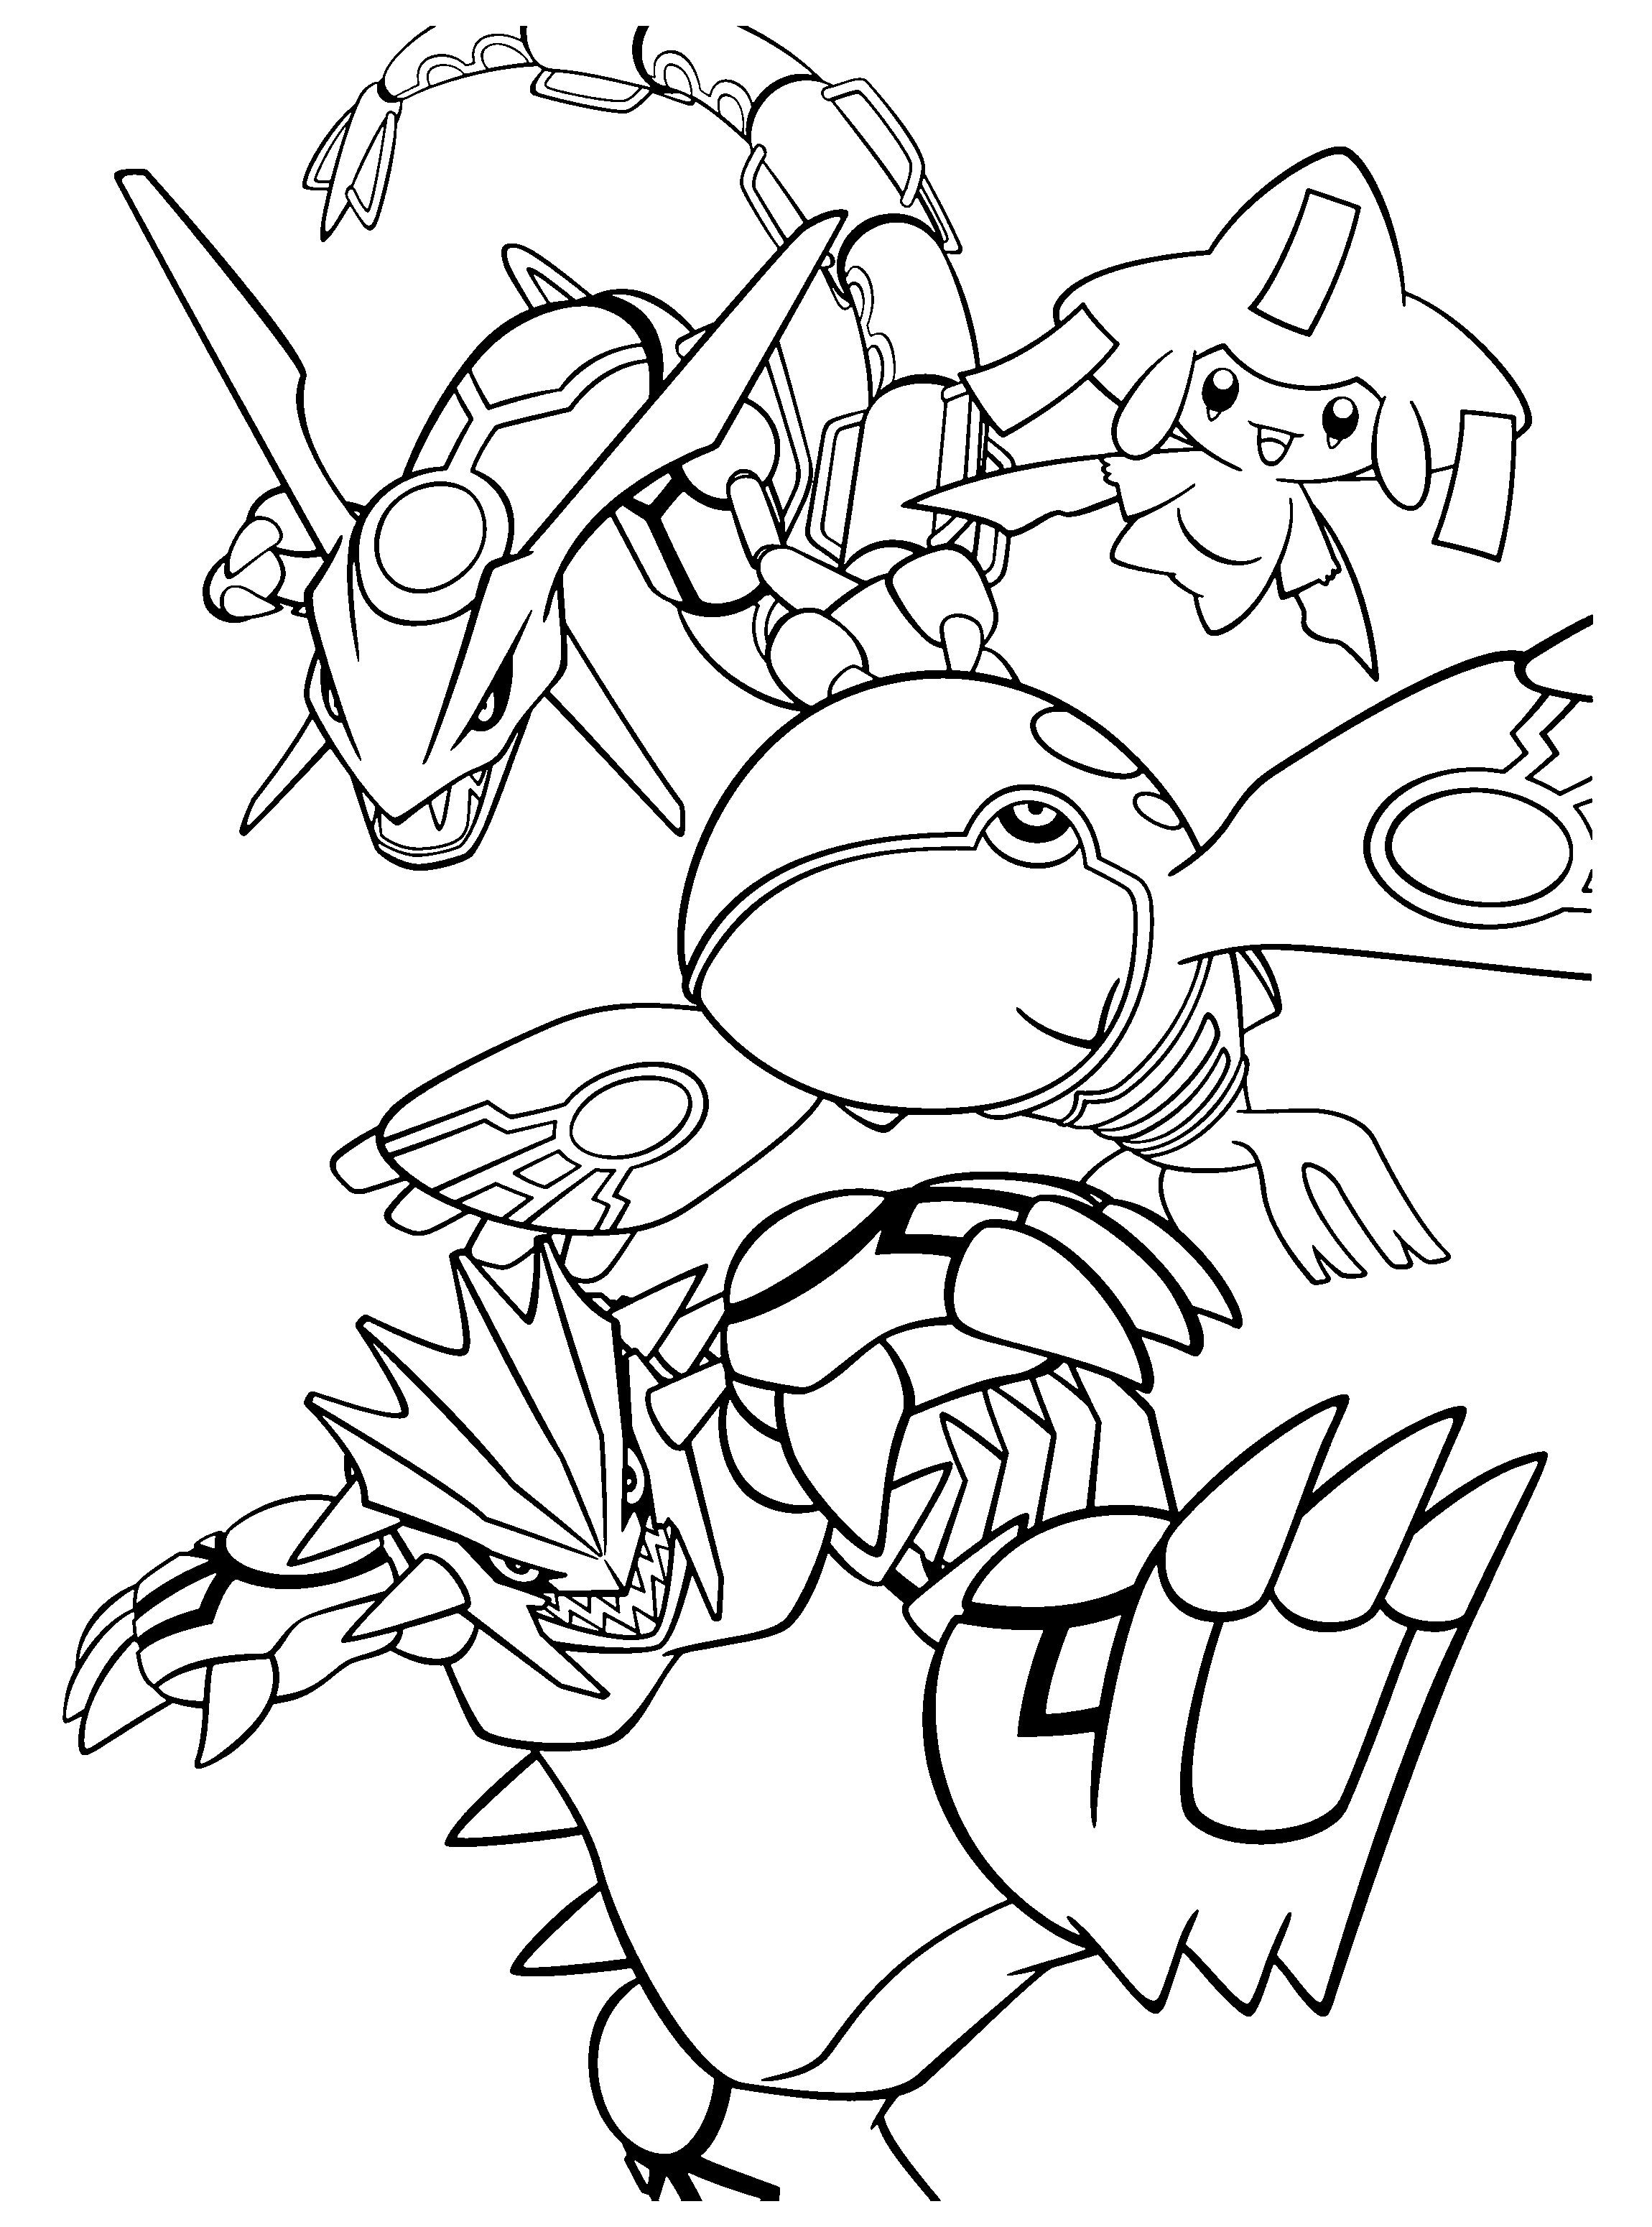 Pokemon Coloring Pages Groudon and Kyogre – Through the thousand  photographs on the net with regar… | Pokemon coloring pages, Cartoon coloring  pages, Coloring pages